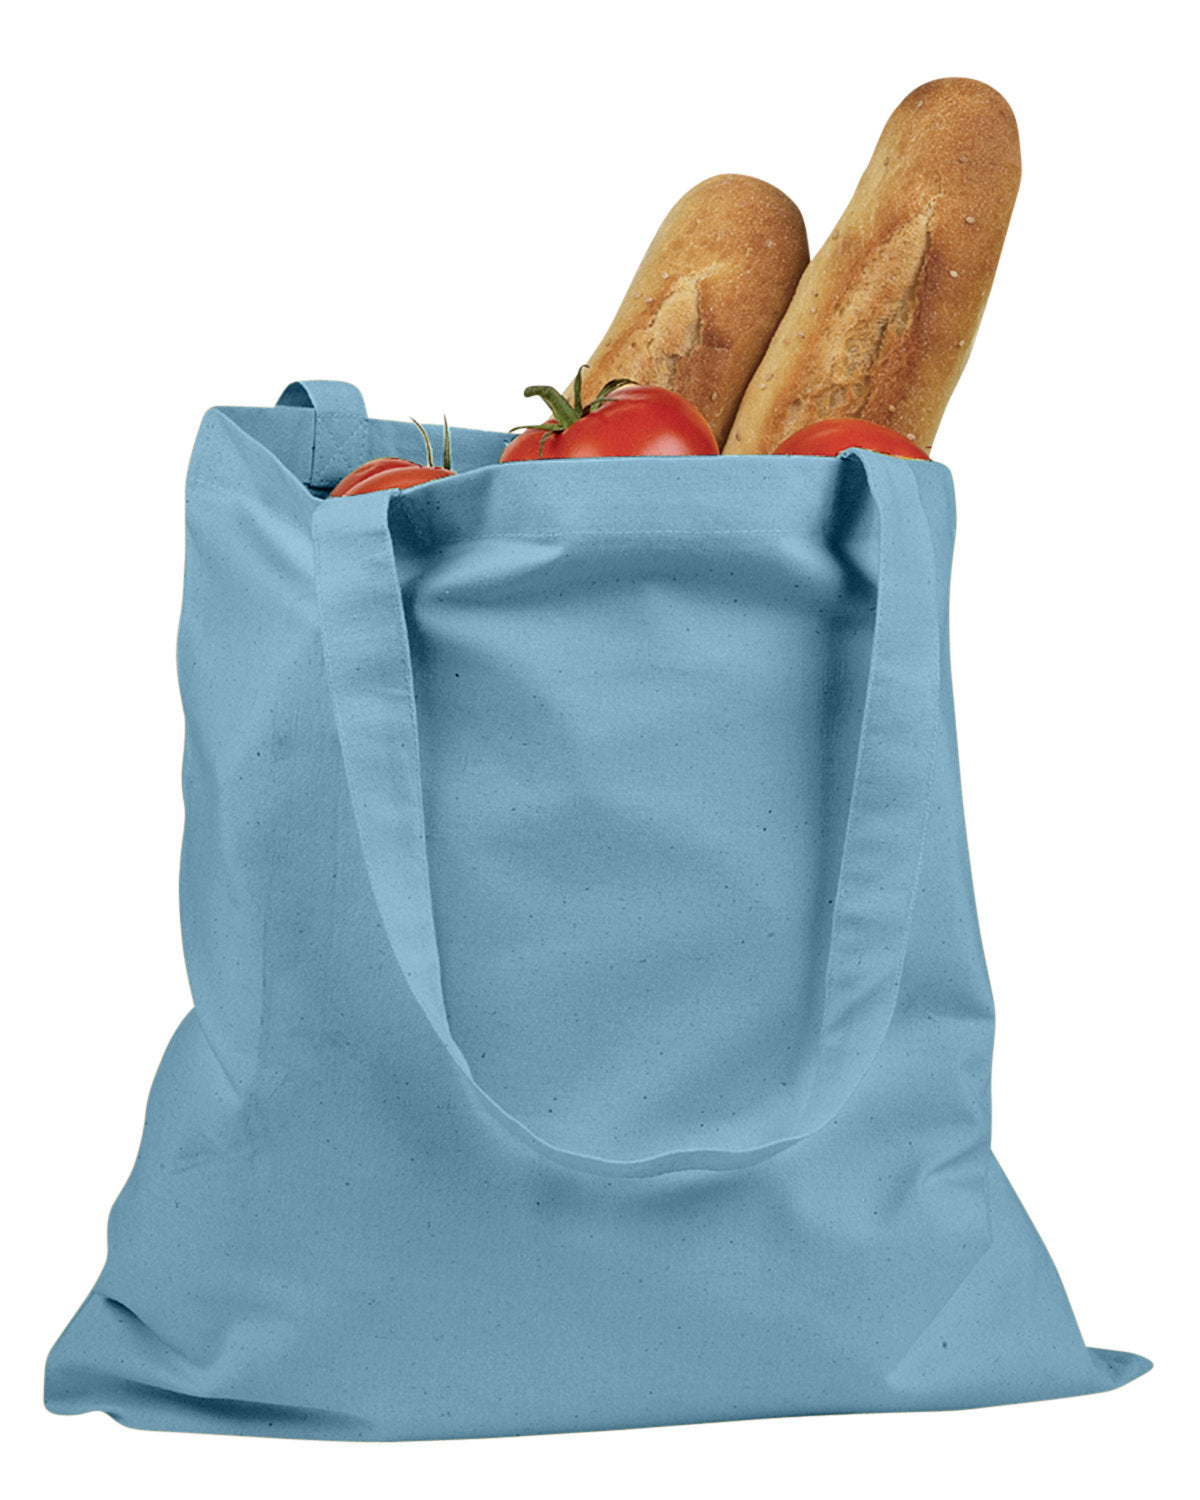 Light Blue tote pictured.